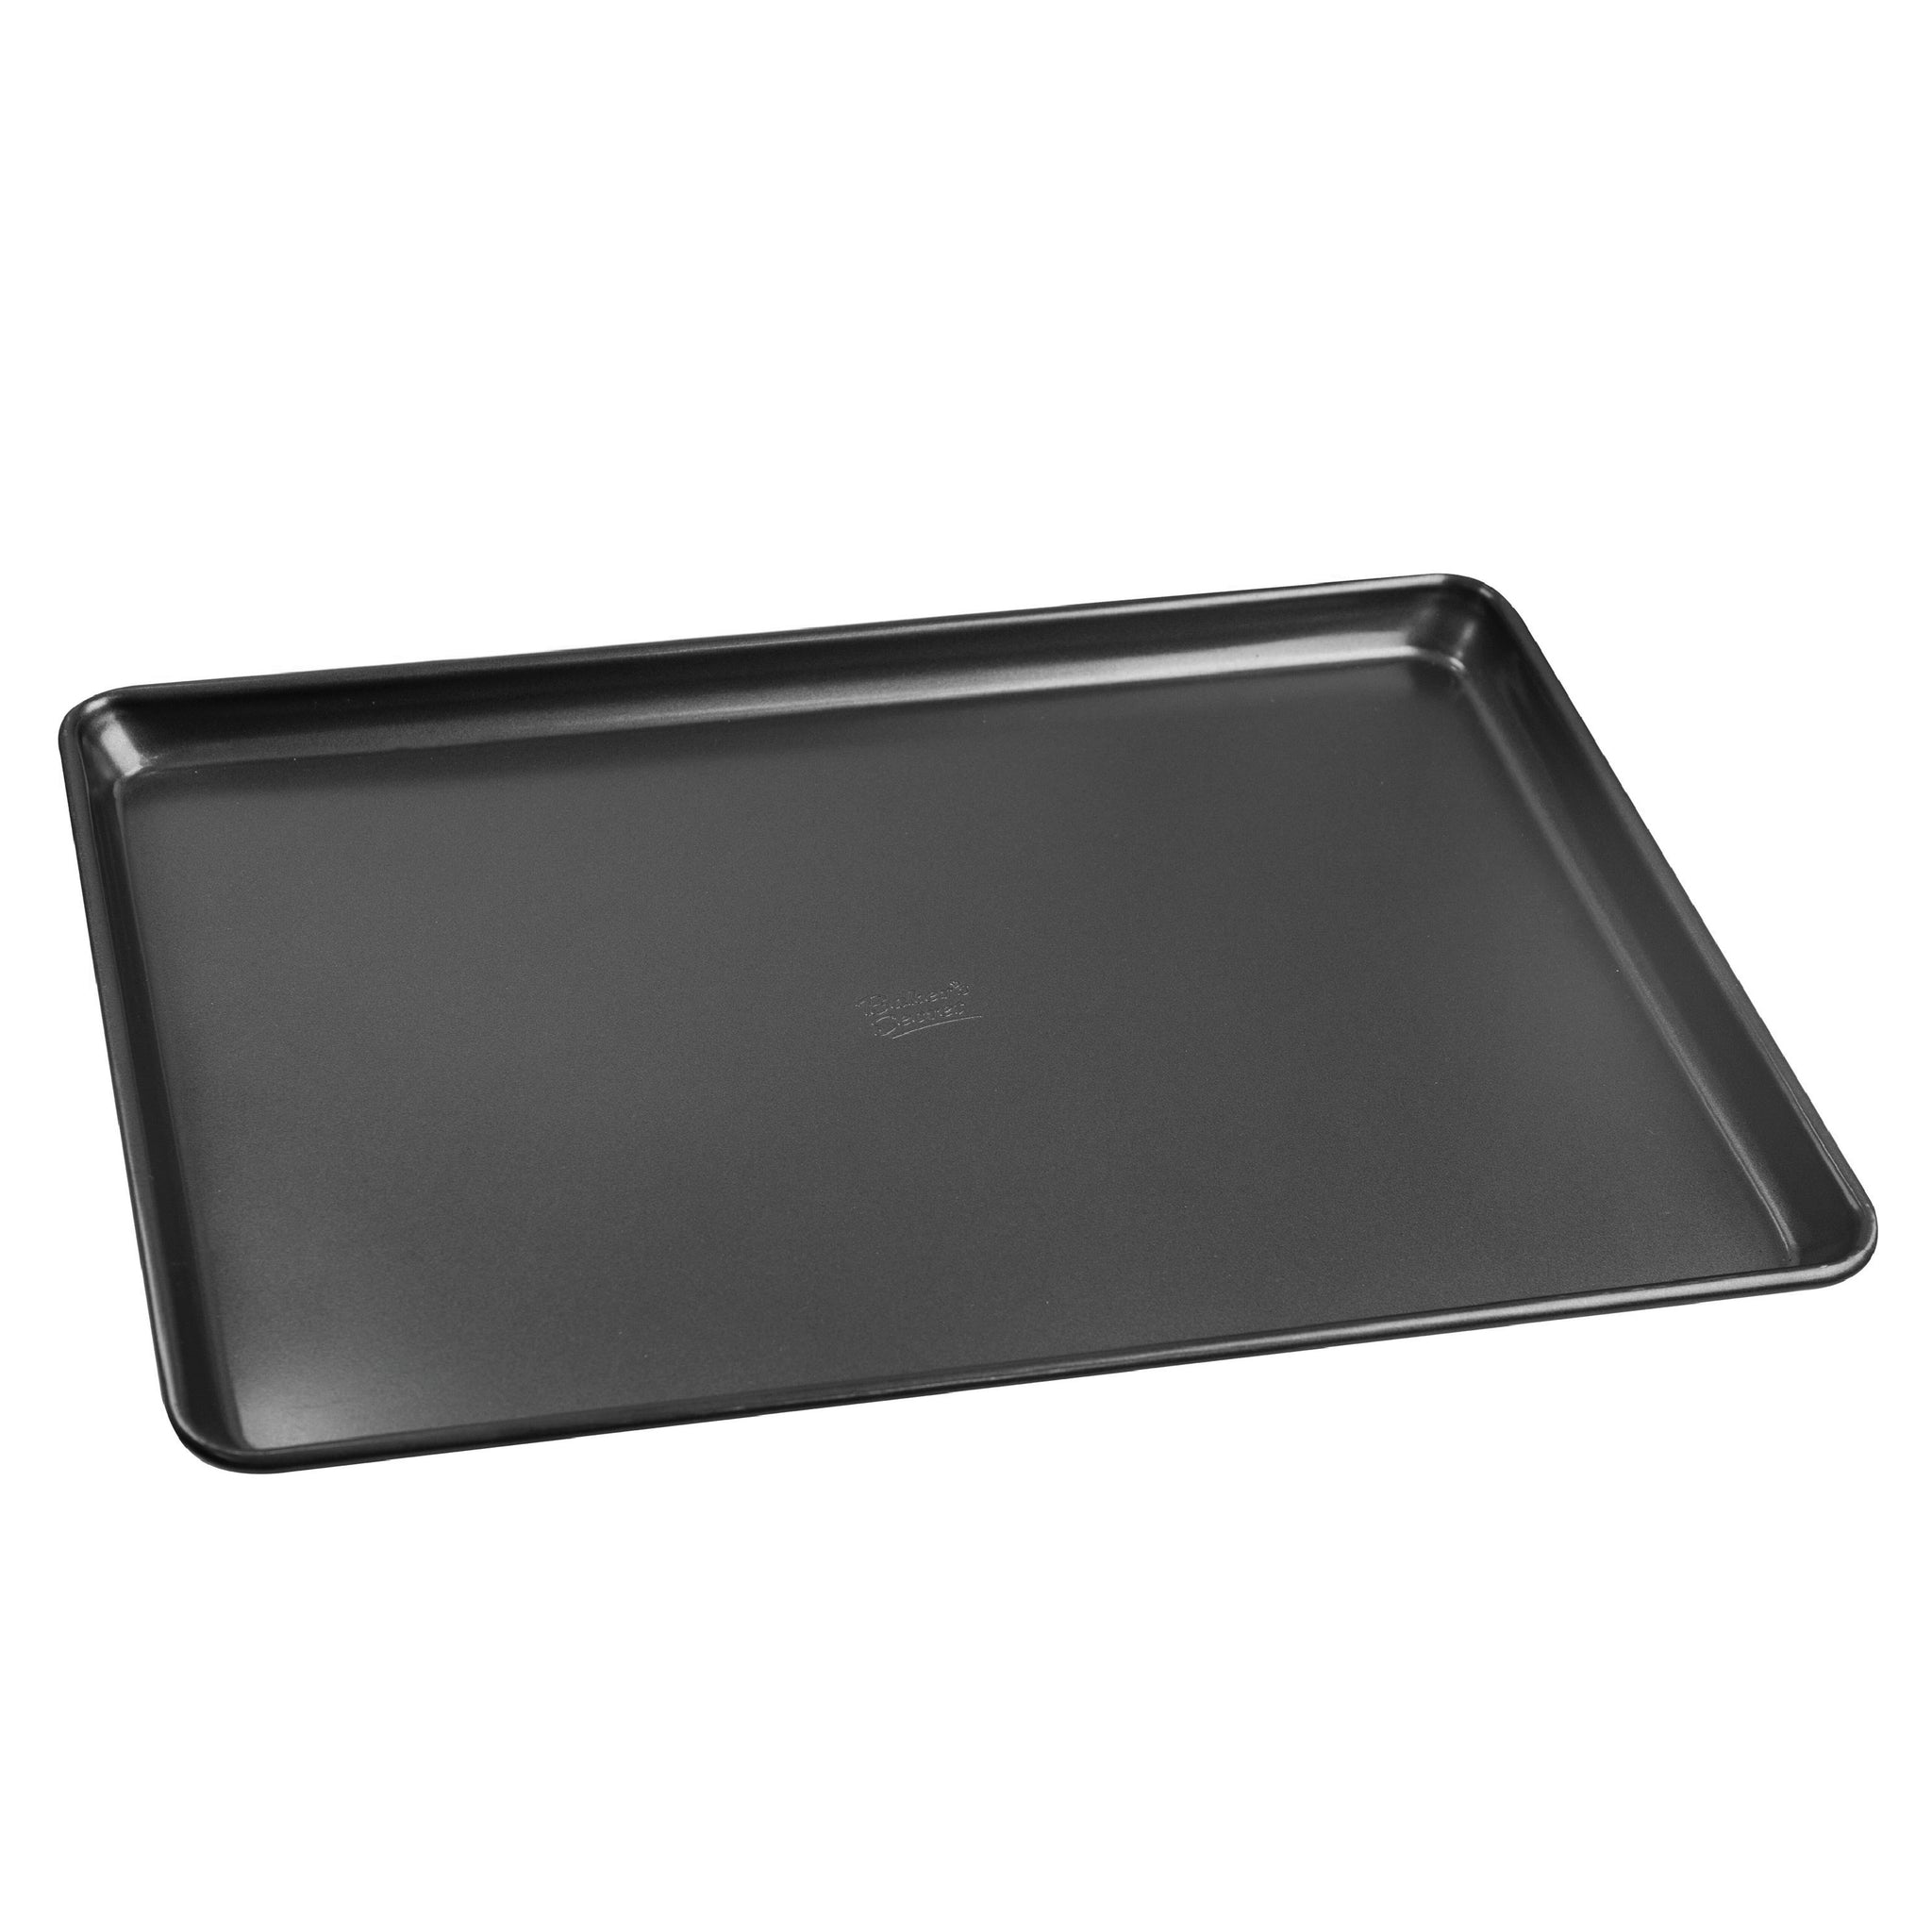 Review of #BAKER'S SECRET Pure Aluminum Insulated Cookie Sheet by Cheyenne,  135 votes